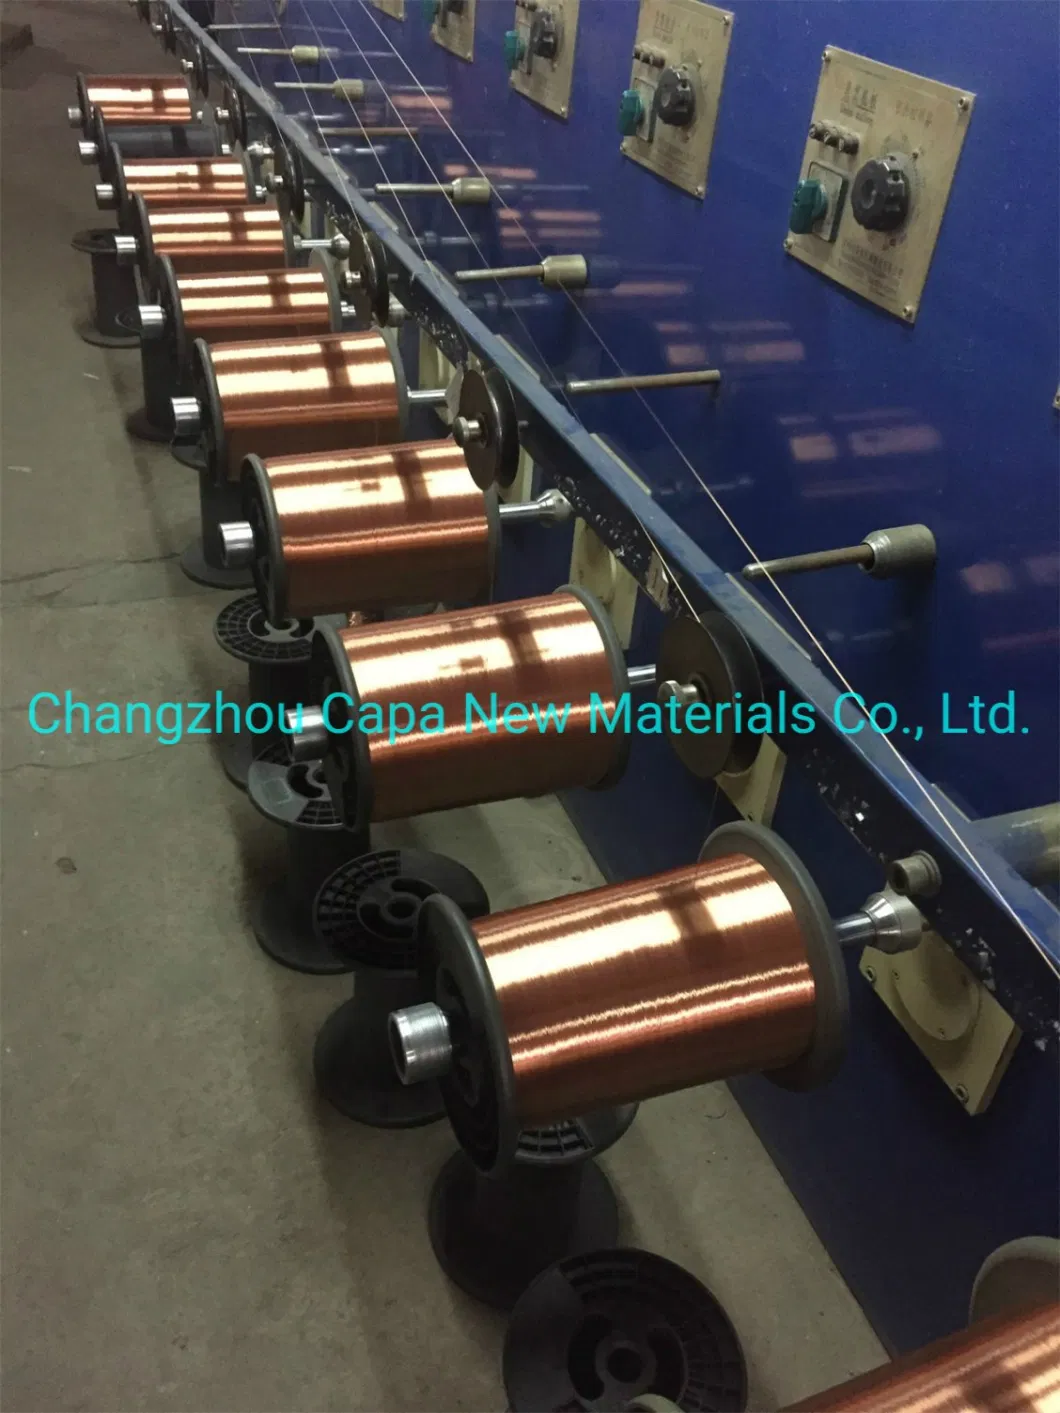 China High Quality 155 Degree Enameled Copper Clad Aluminum Winding Wire for Motor Winding